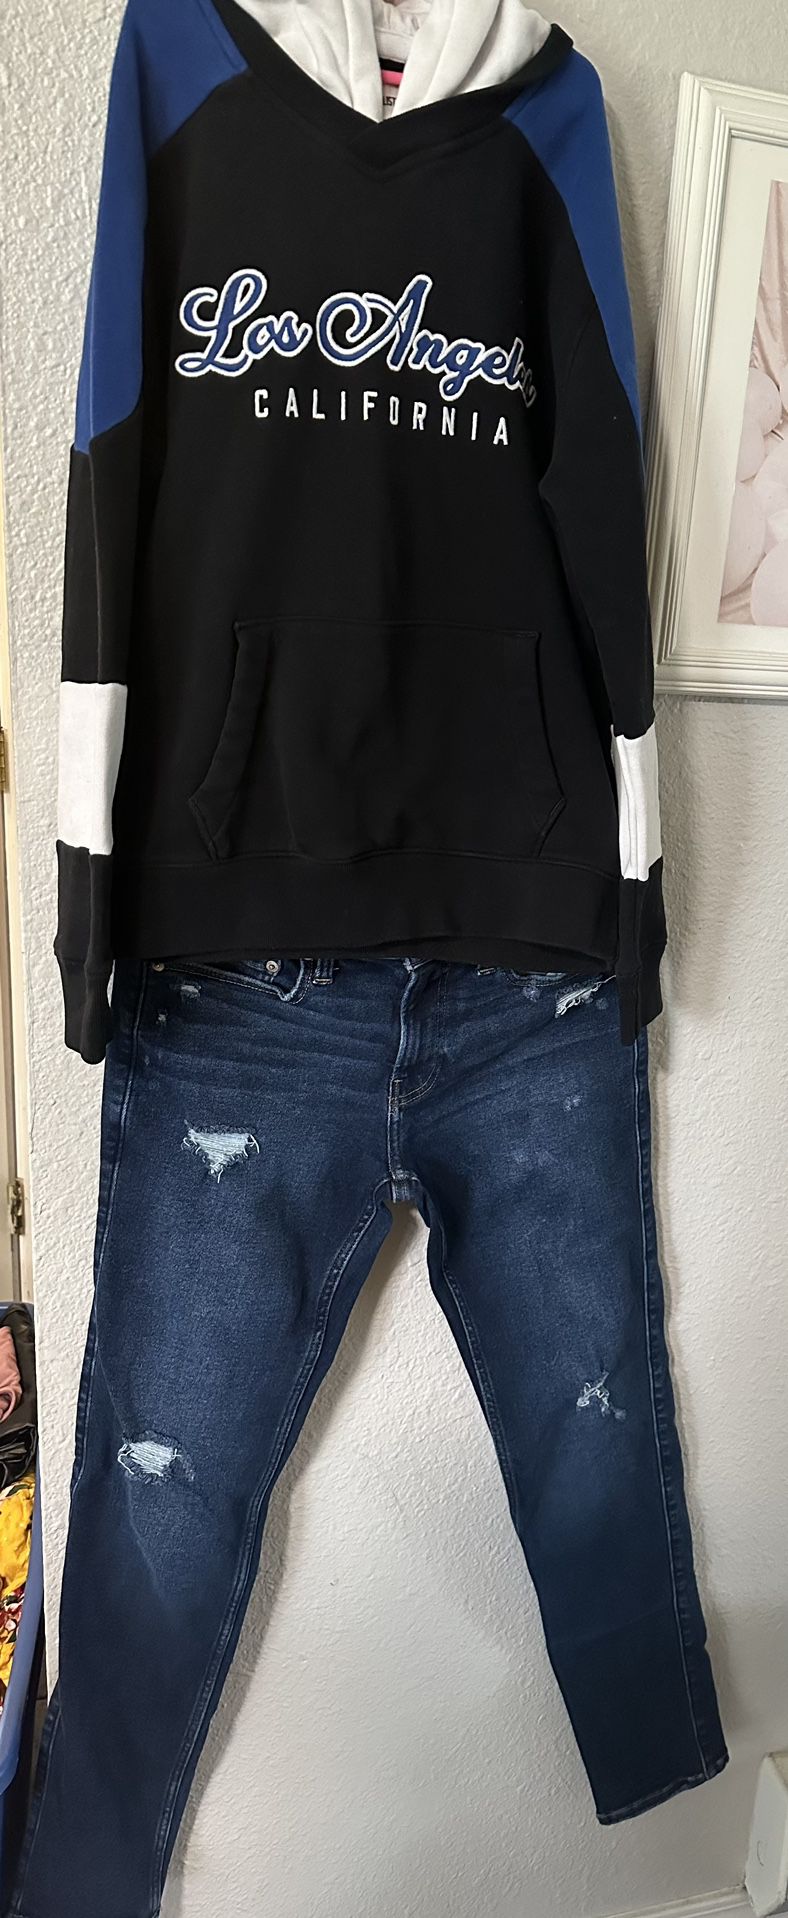 Two Jeans Size 30w 30L And A Hoodie Size Small From Hollister 